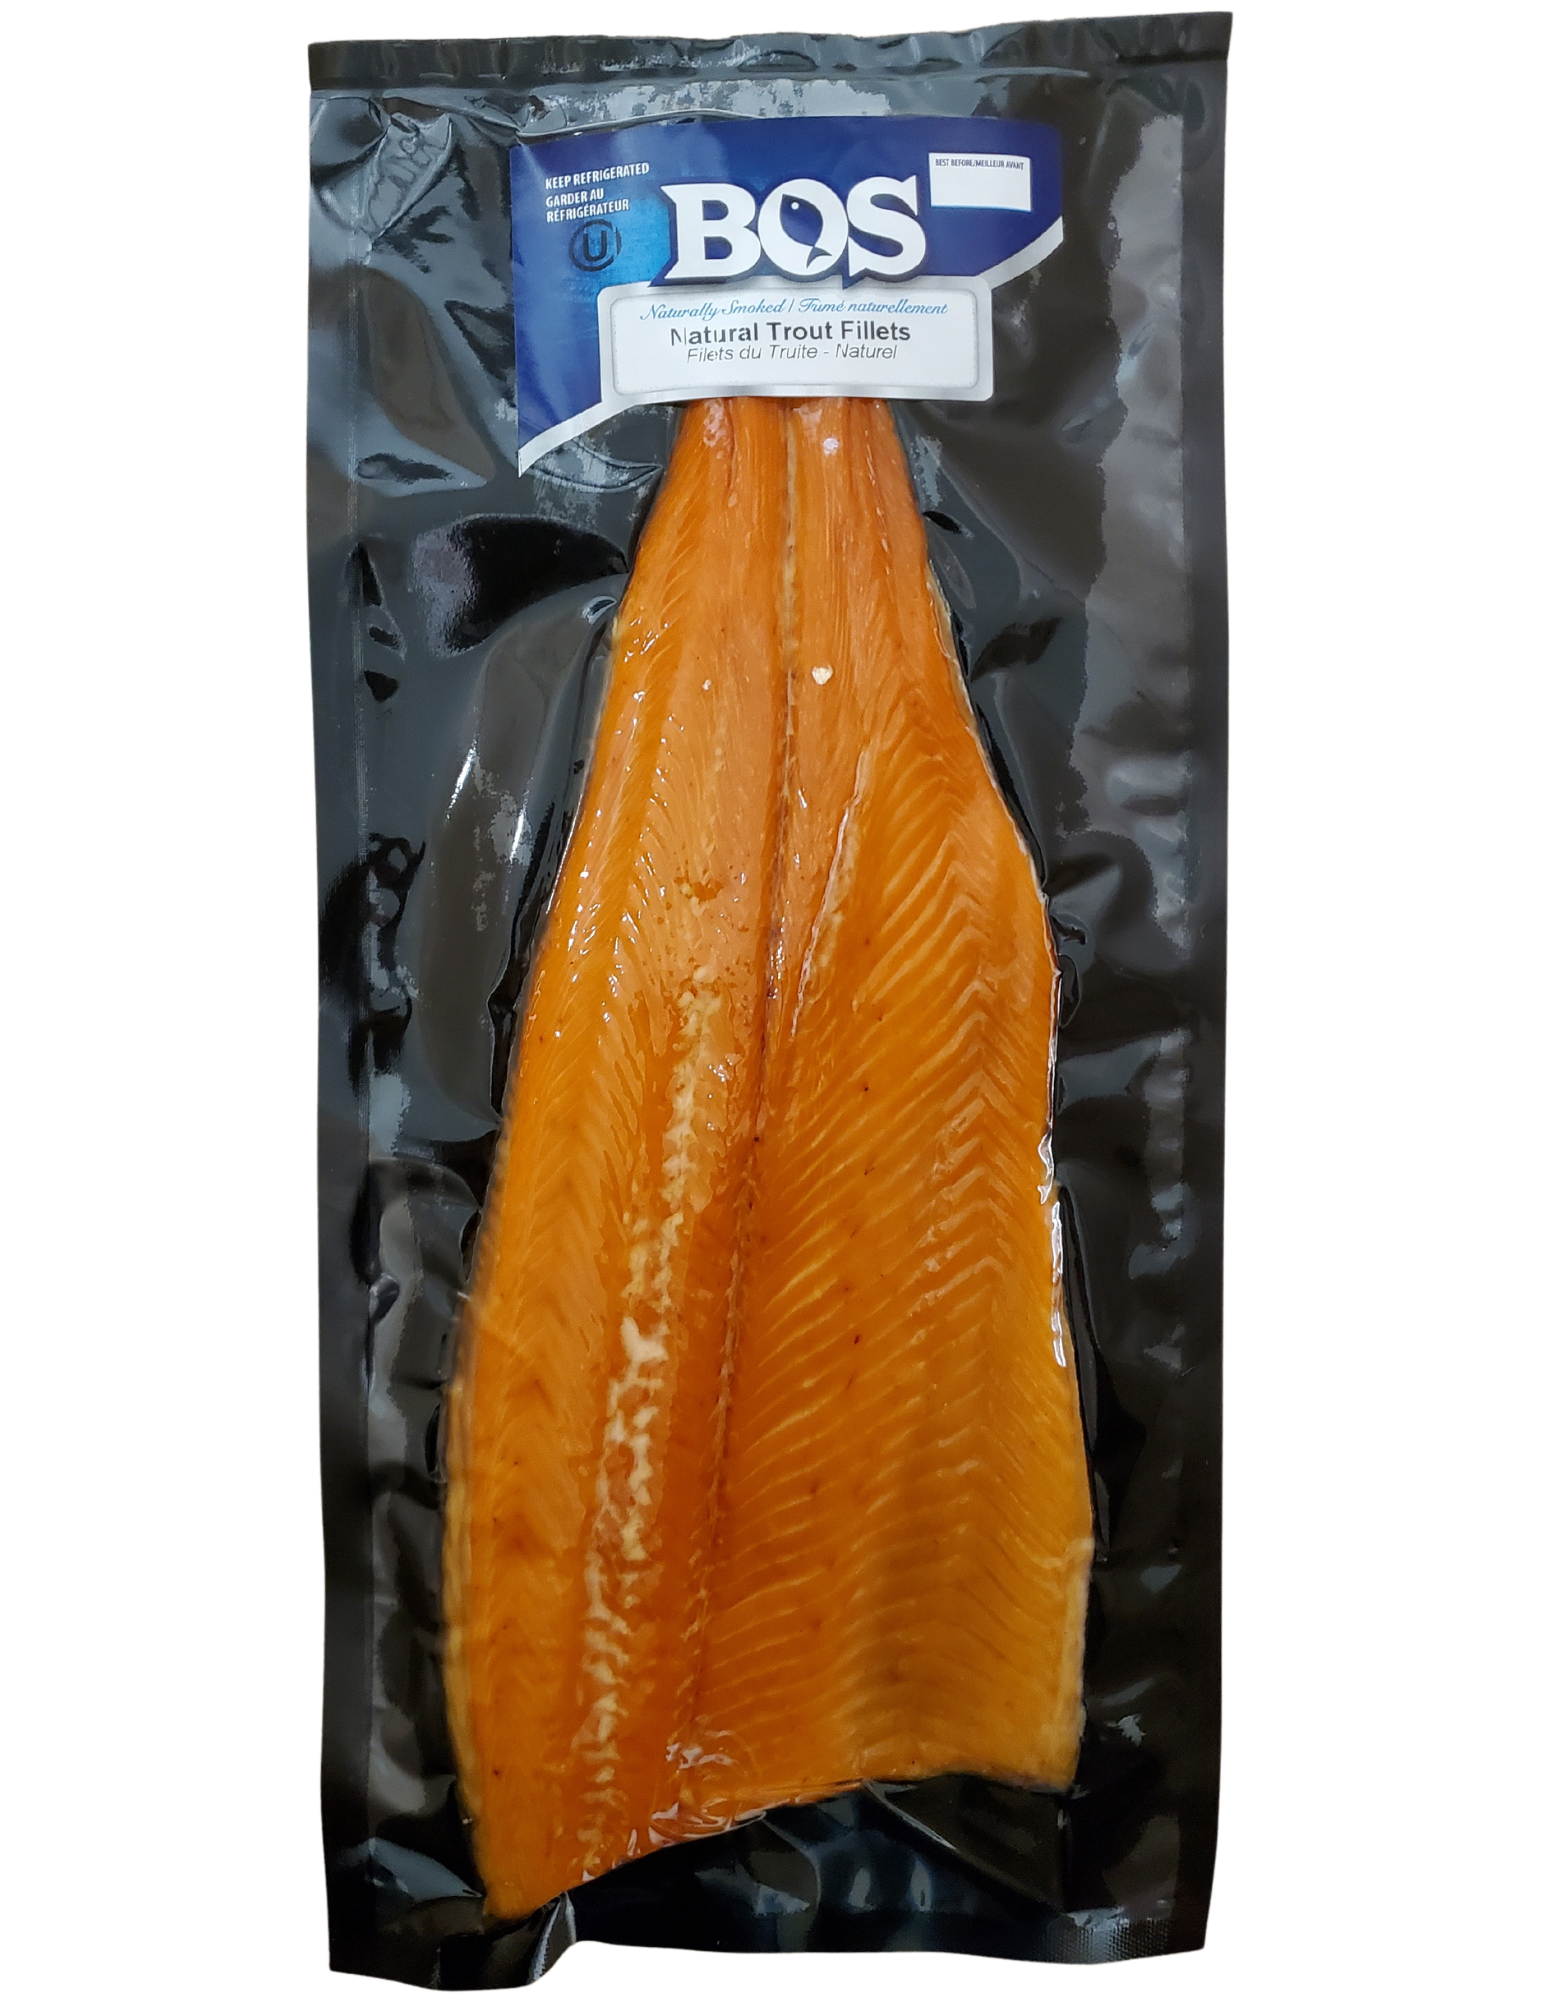 SMOKED TROUT FIL NATURAL 190g FROZEN